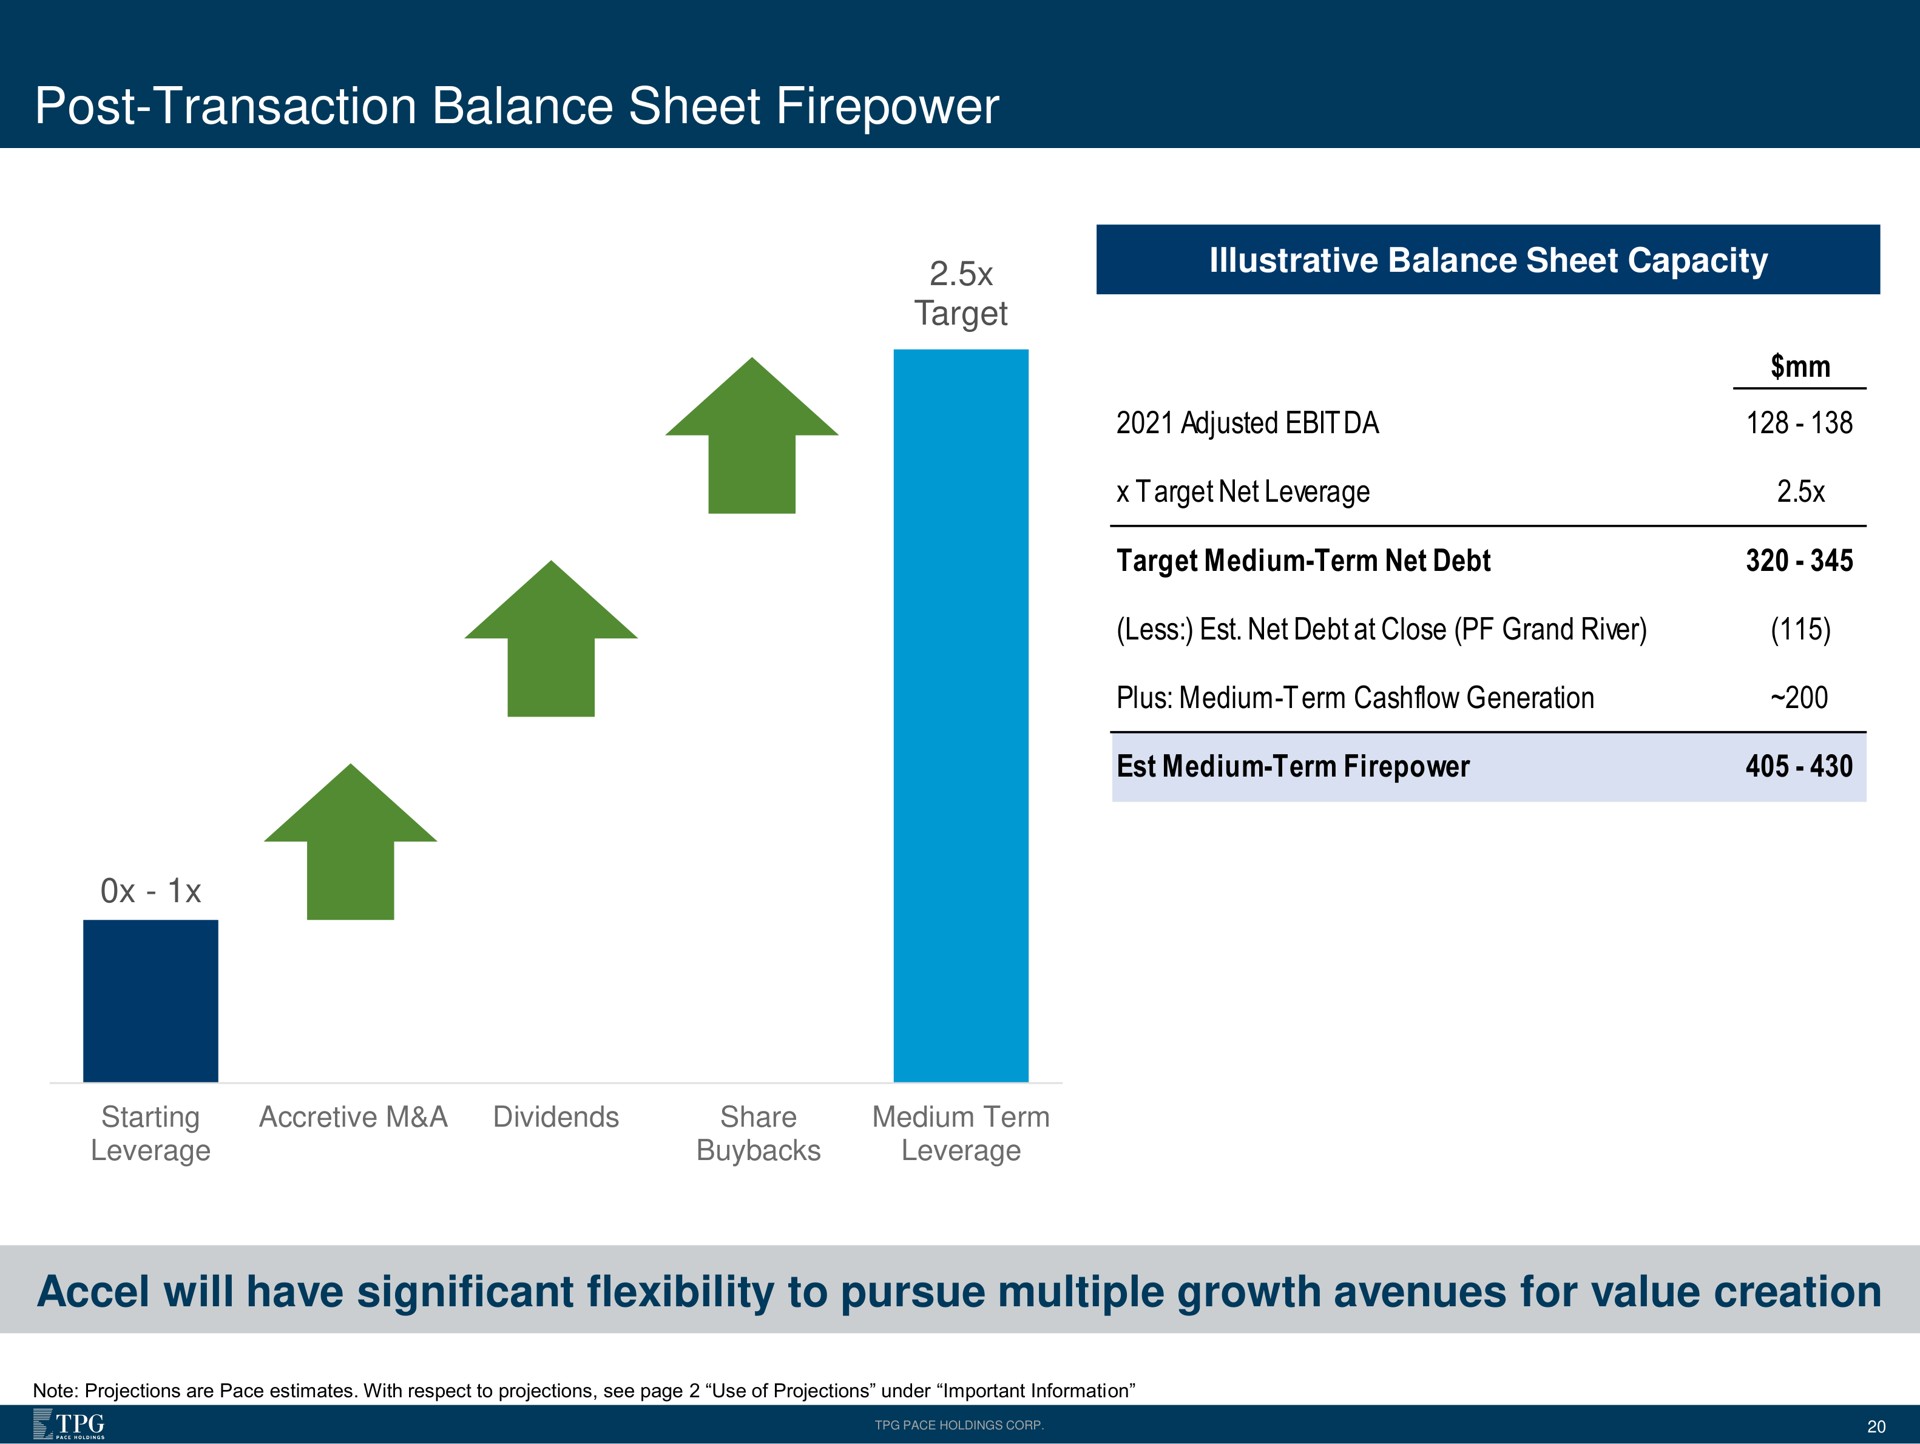 post transaction balance sheet firepower will have significant flexibility to pursue multiple growth avenues for value creation | Accel Entertaiment